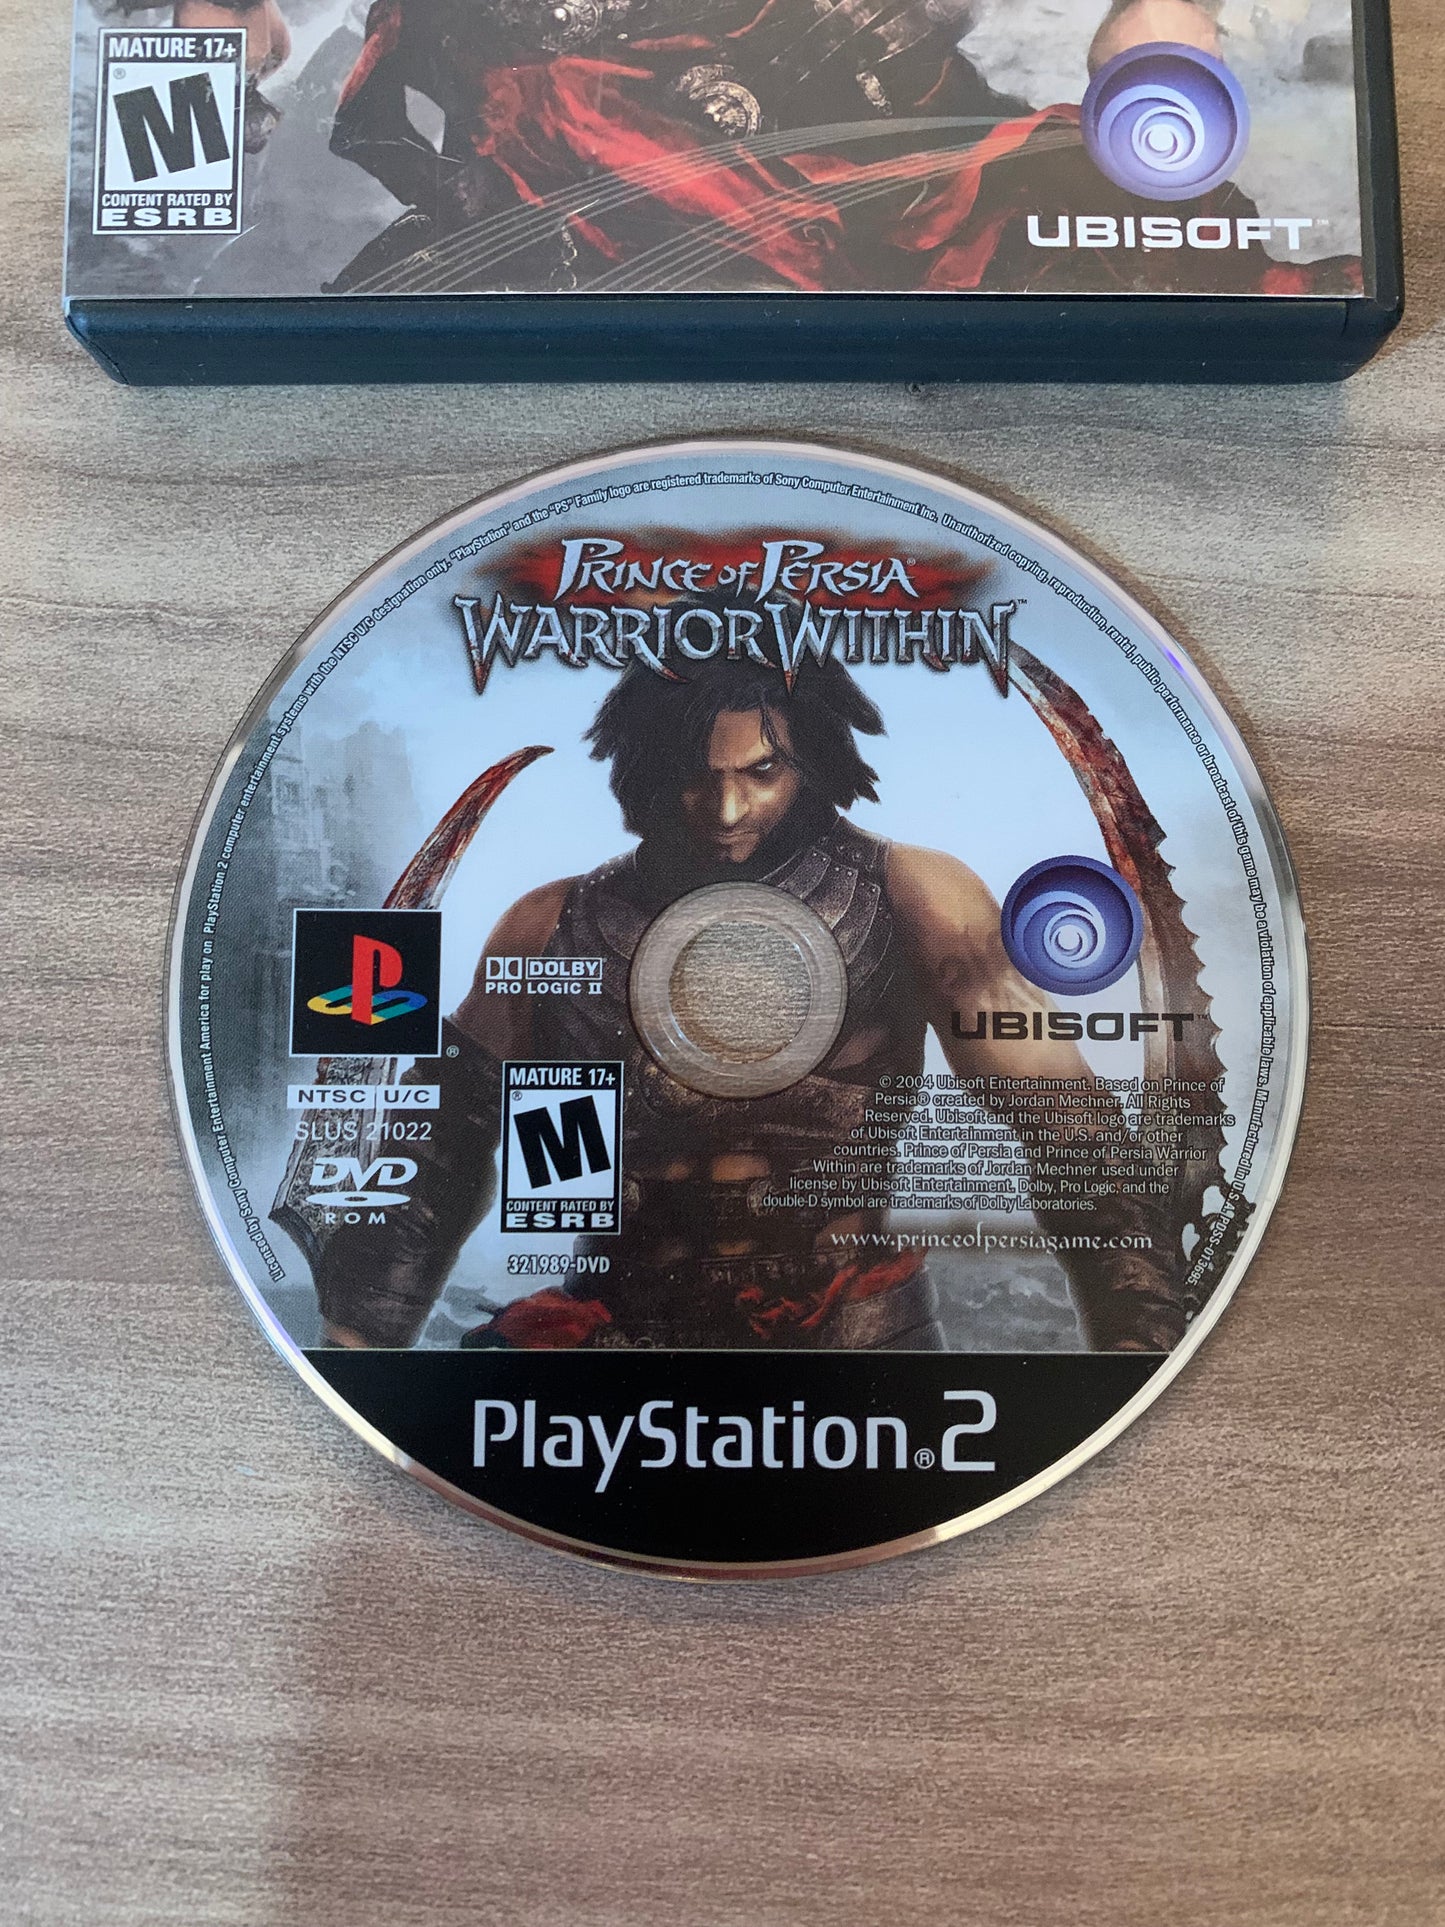 SONY PLAYSTATiON 2 [PS2] | PRiNCE OF PERSiA WARRiOR WiTHiN